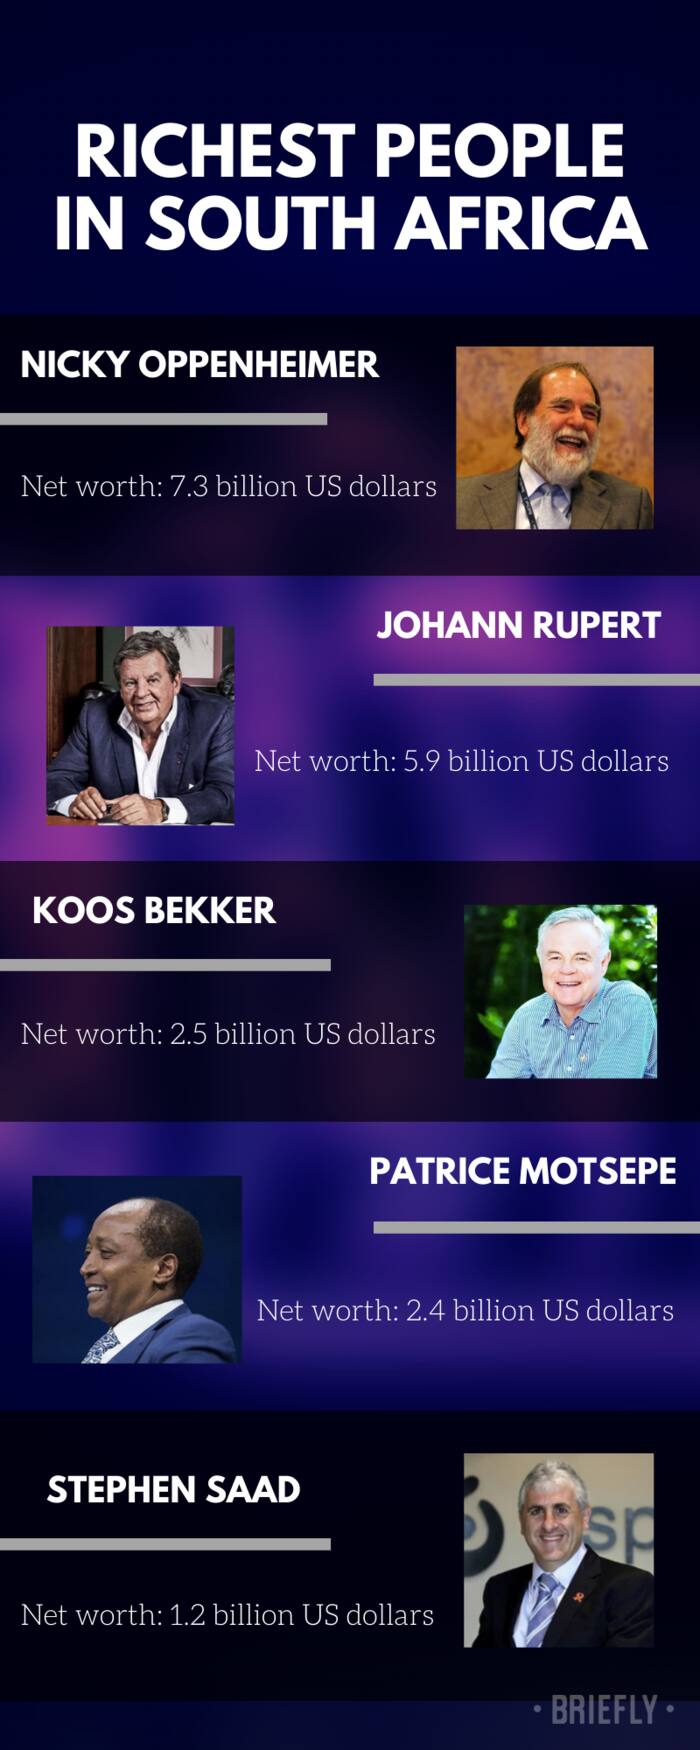 Top 10 richest people in South Africa and their net worth 2021